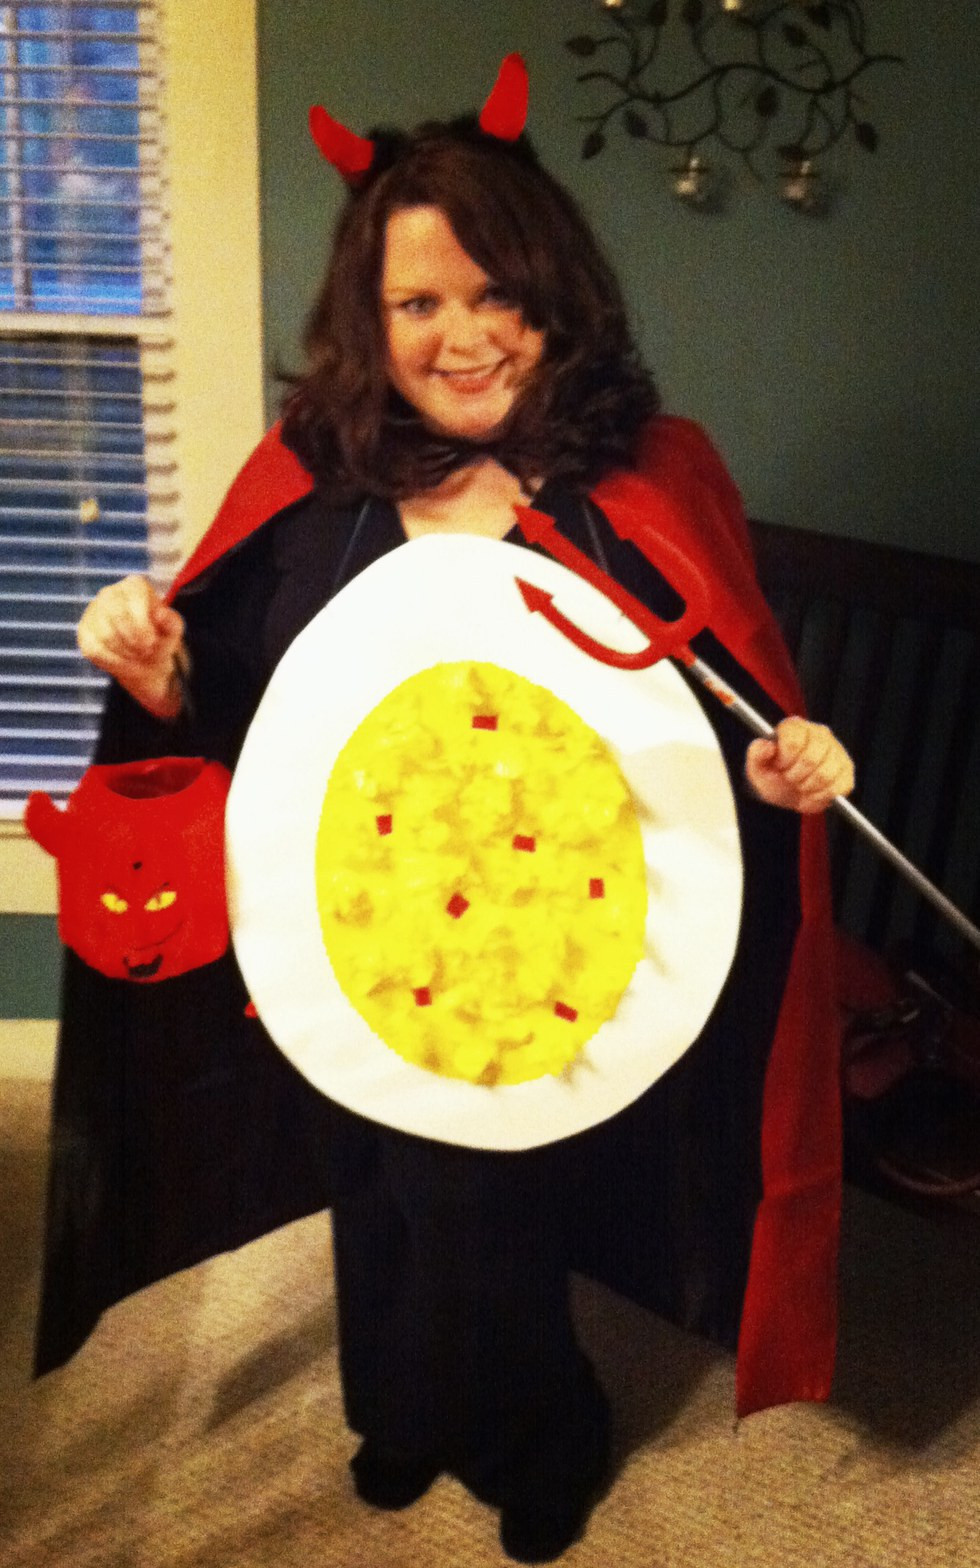 Deviled Egg Costume DIY
 9 DIY Halloween Costume Ideas You Must Try